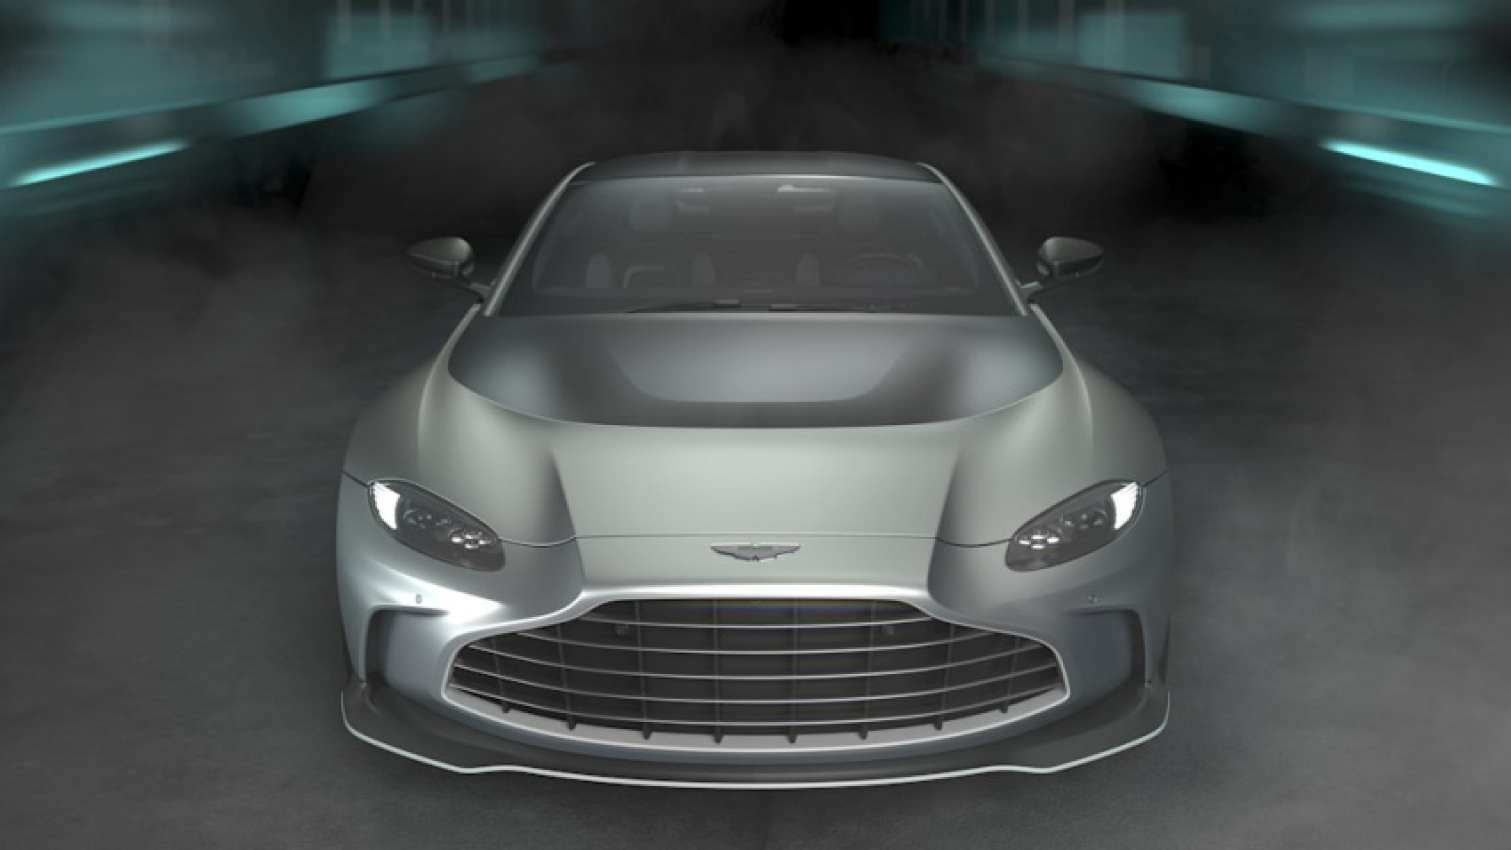 aston martin, autos, cars, coupe, performance, special and limited editions, supercars, aston martin v12 vantage revealed as the last of the line